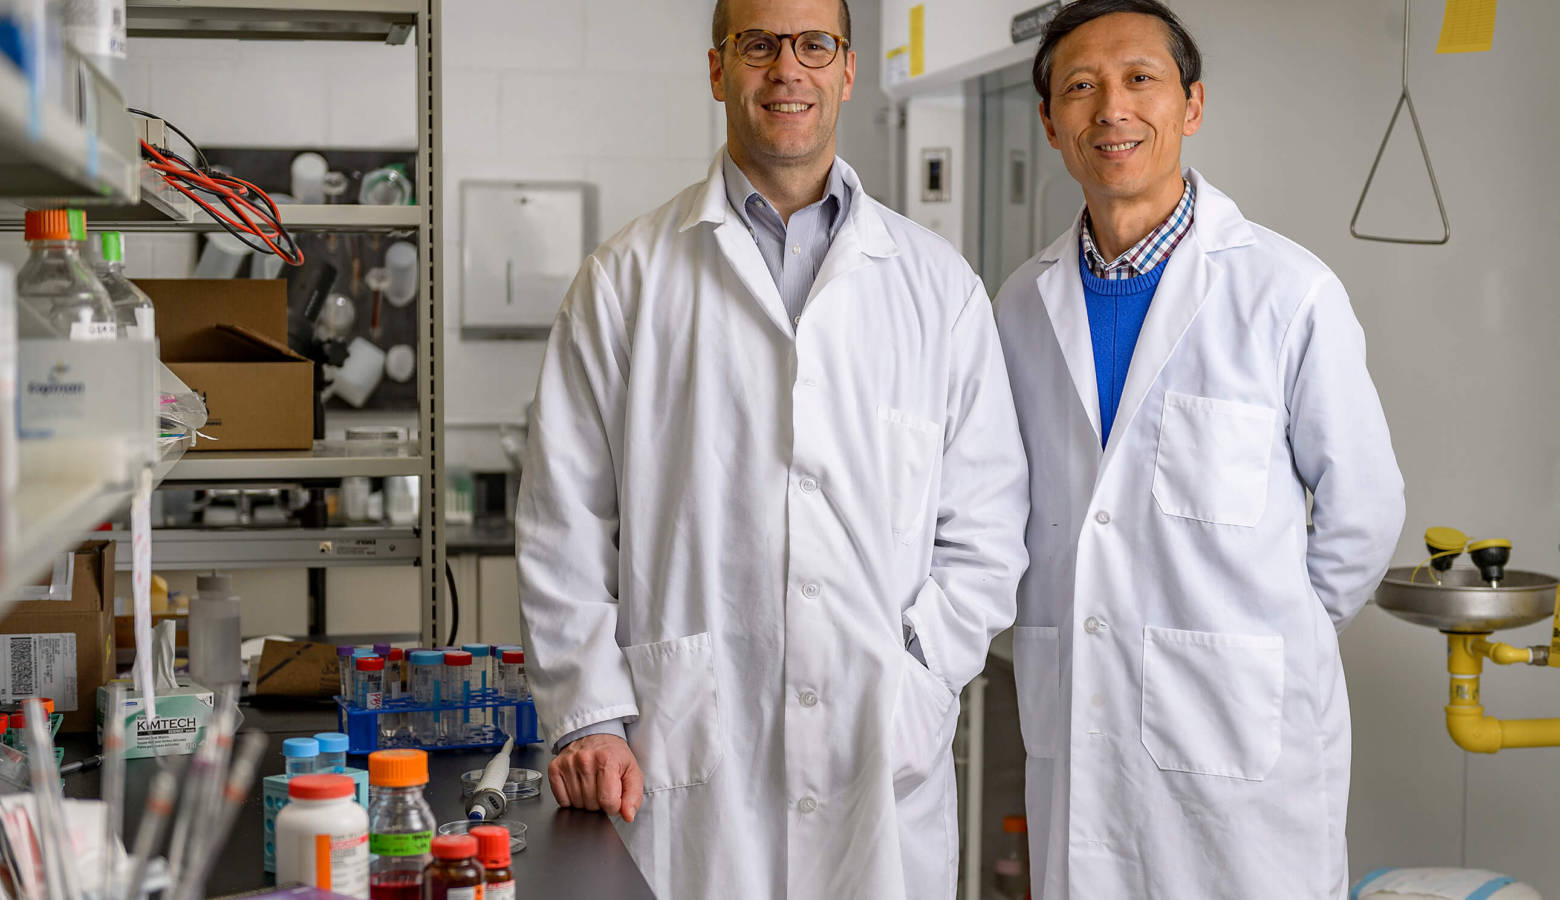 Purdue University researchers Jean-Christophe “Chris” Rochet and Dr. Riyi Shi say their discovery of a key factor in the development of Parkinson’s disease could lead to new therapies. (Photo courtesy of Alex Kumar/Purdue University)